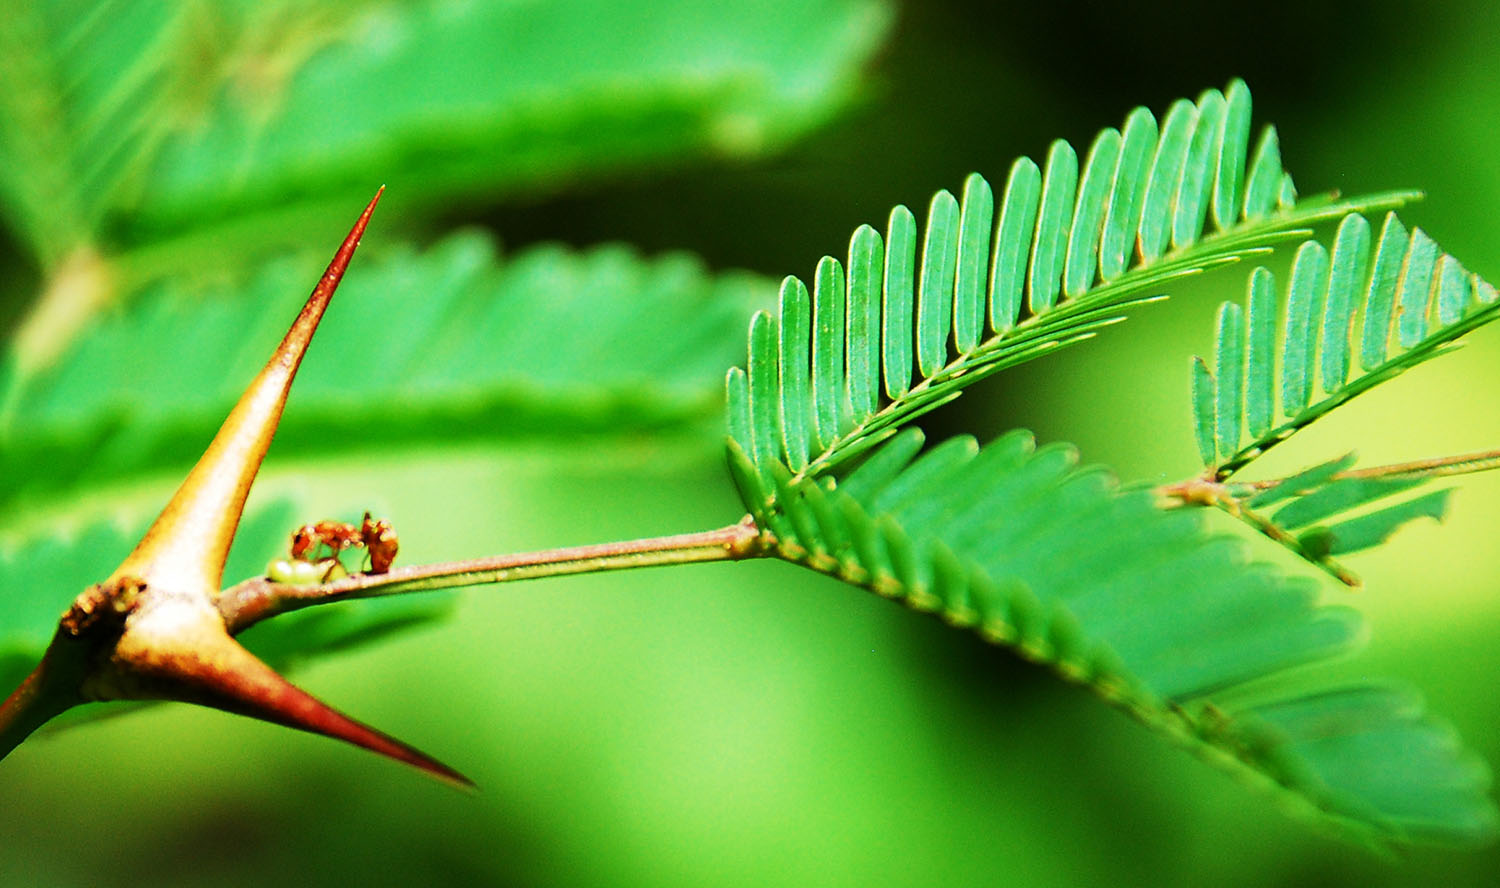 An ant crawls along a plant with large thorns and small, green leaves.